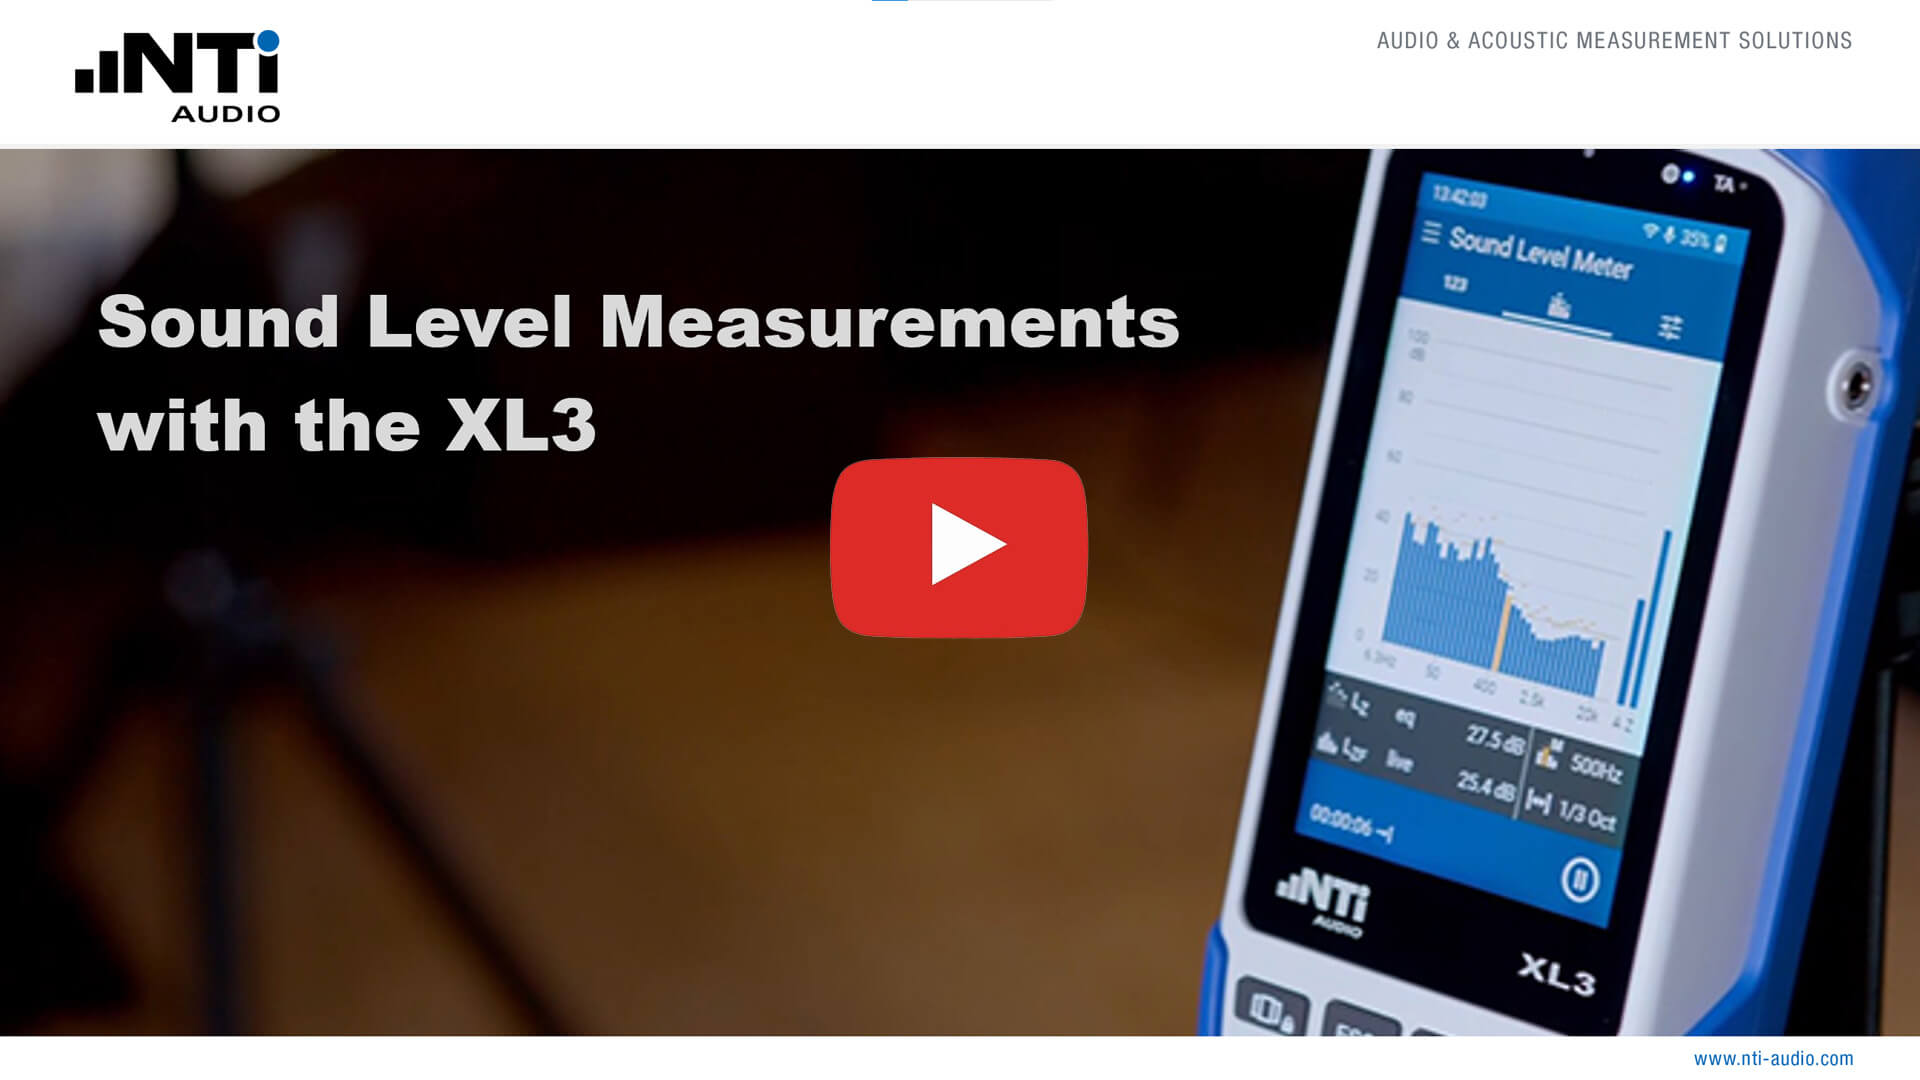 Sound Level Measurements with the XL3 Acoustic Analyzer